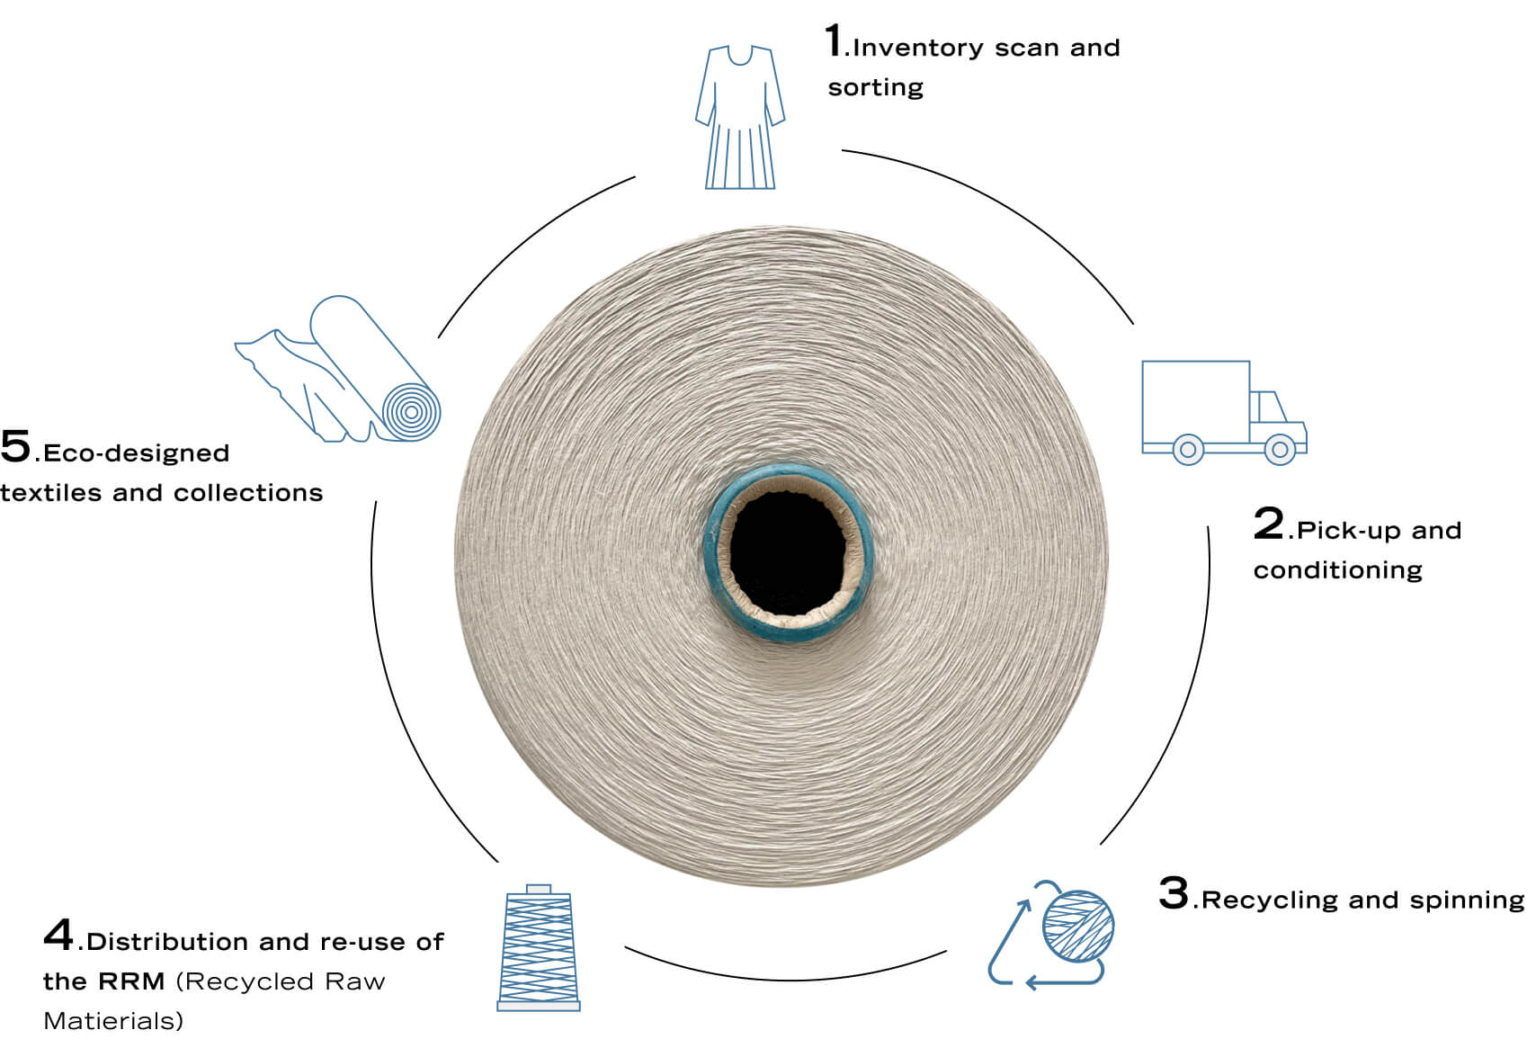 French startup improves traceability in textile recycling